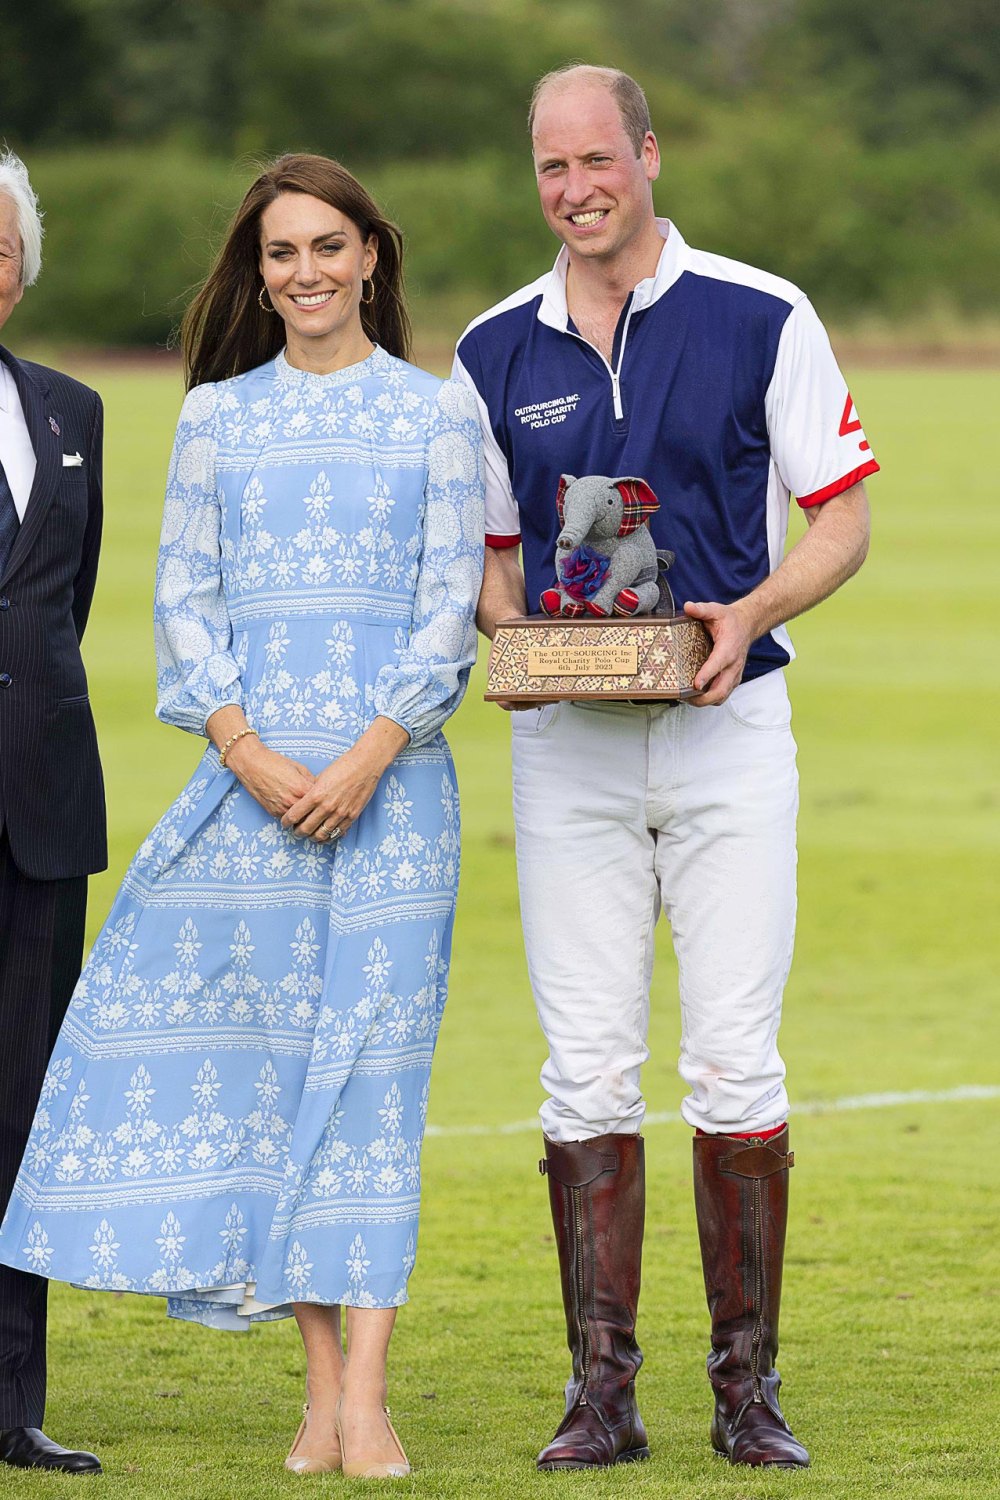 Princess Kate Celebrates Prince William s Polo Win With a Kiss 1 Day After Playfully Patting His Butt in Public-209